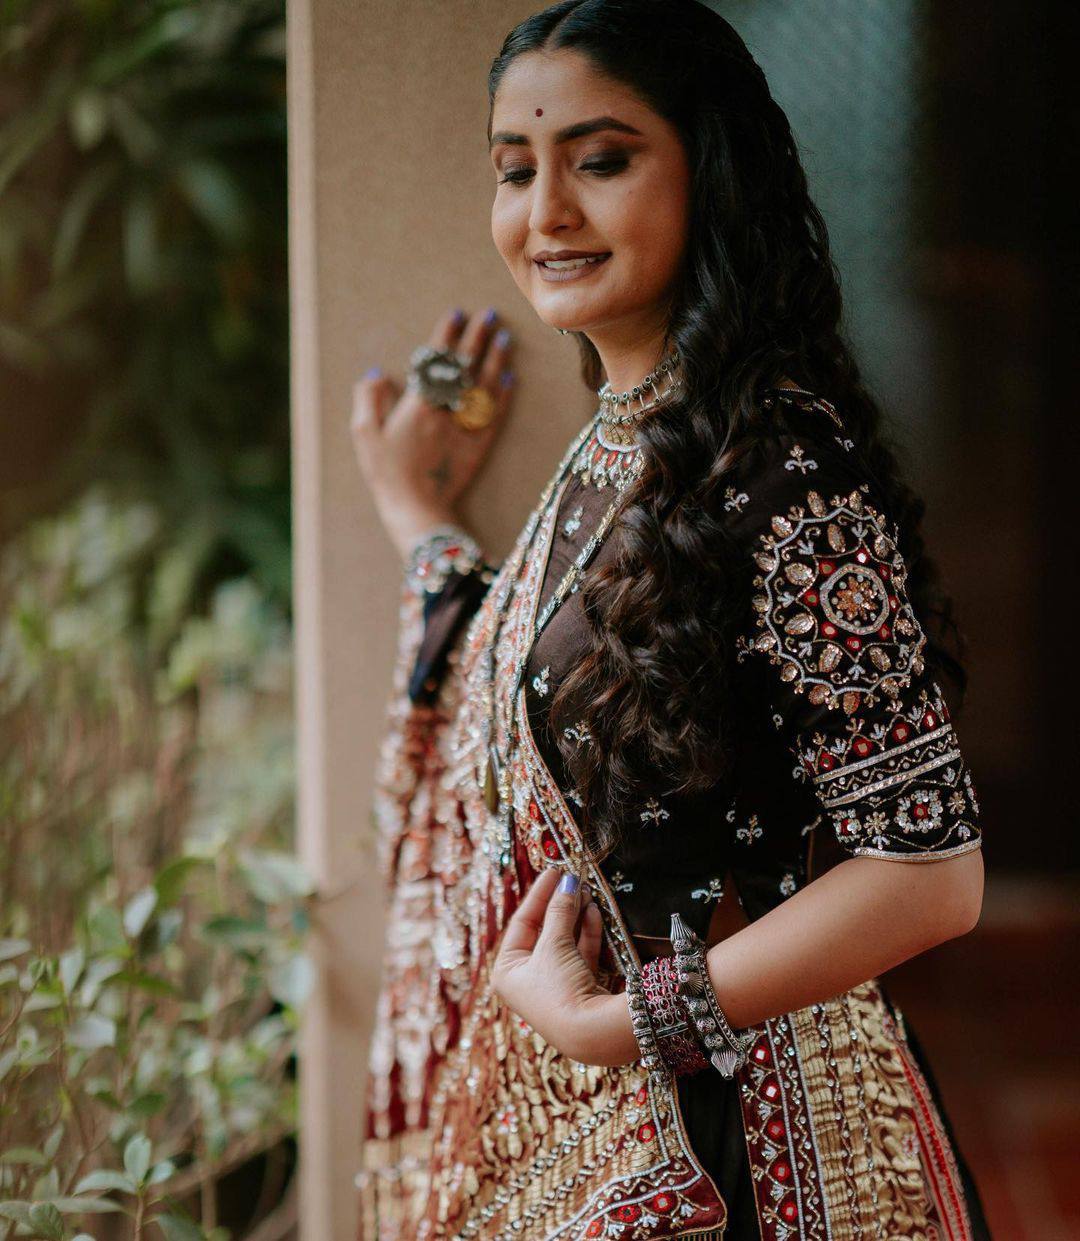 Young Woman in Burgundy Embroidered Sari and Traditional Indian Jewelry ·  Free Stock Photo